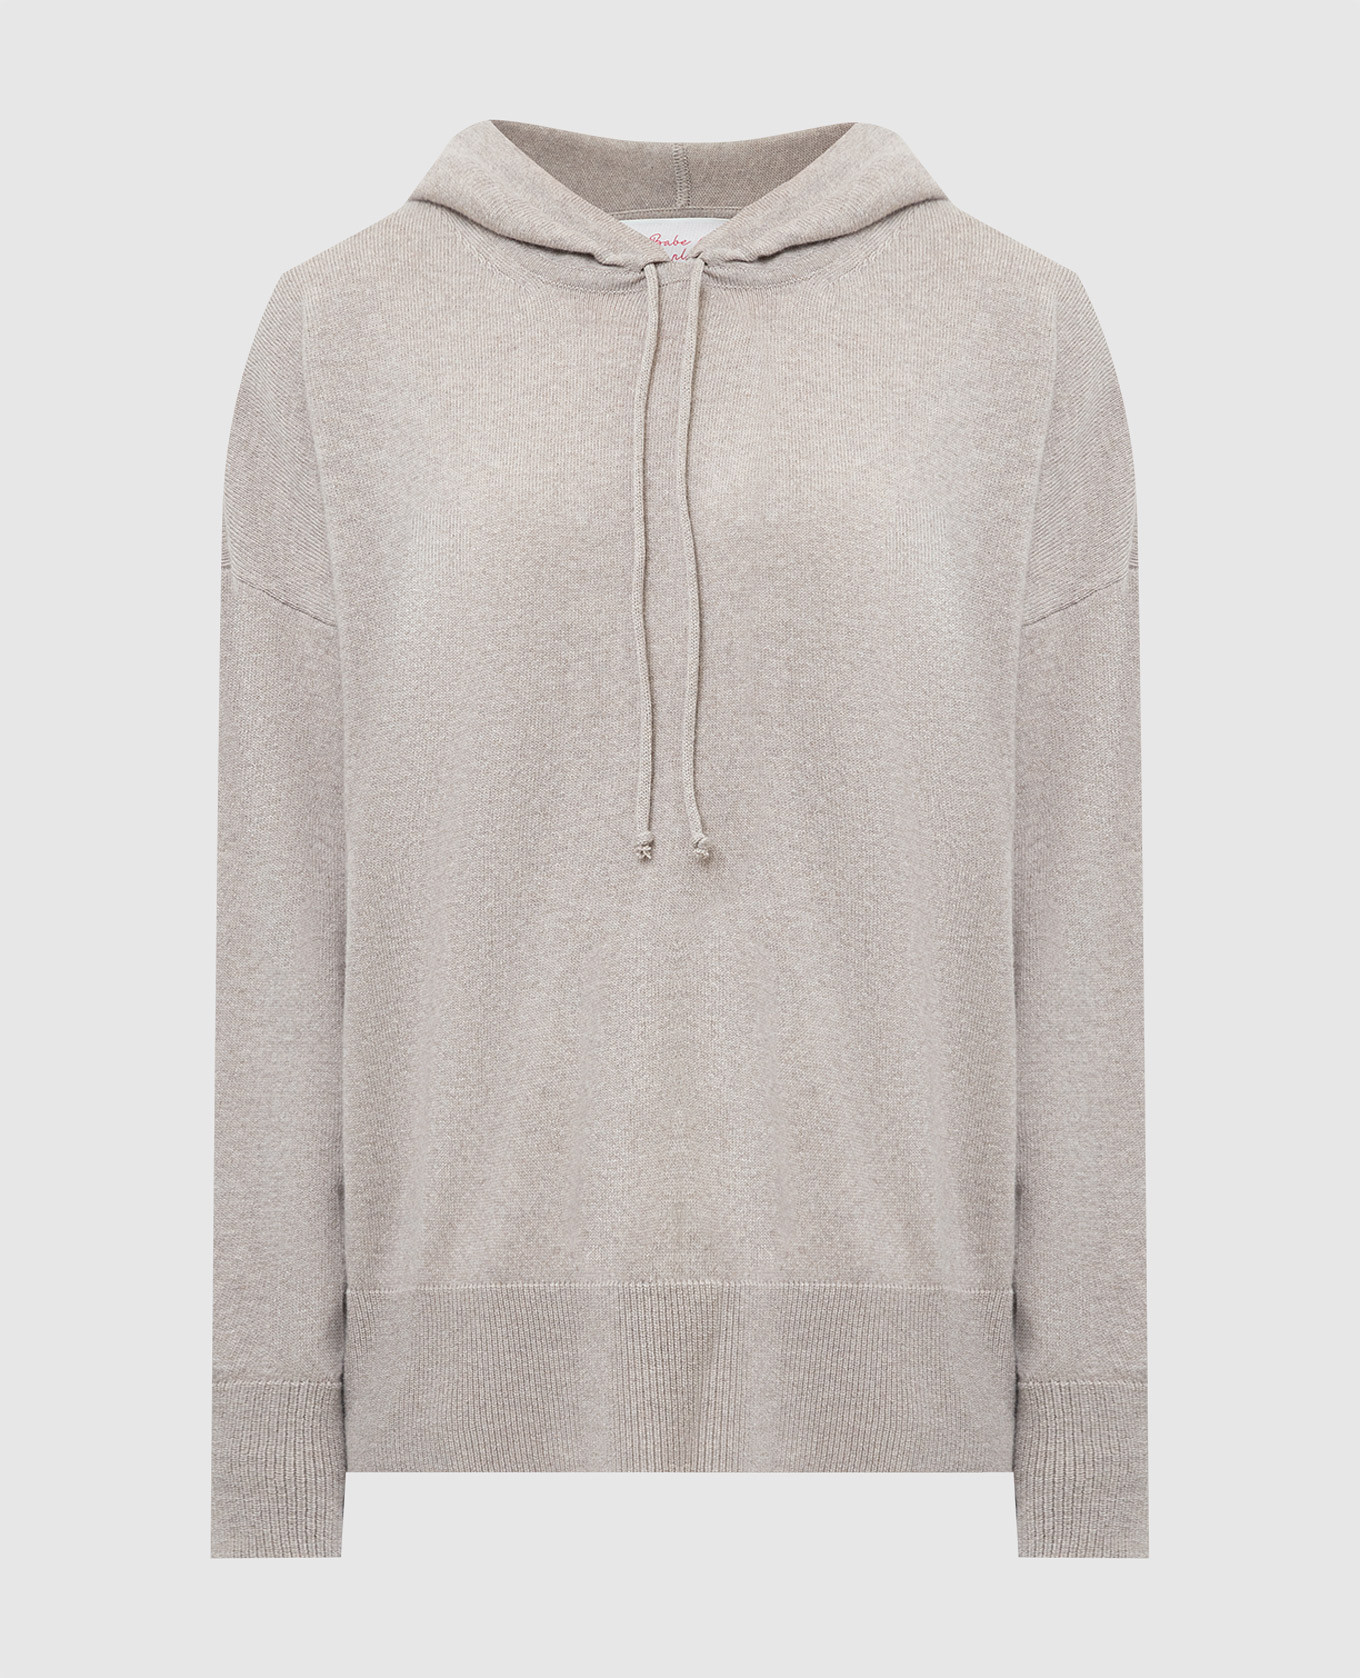 Beige wool and cashmere hooded jumper